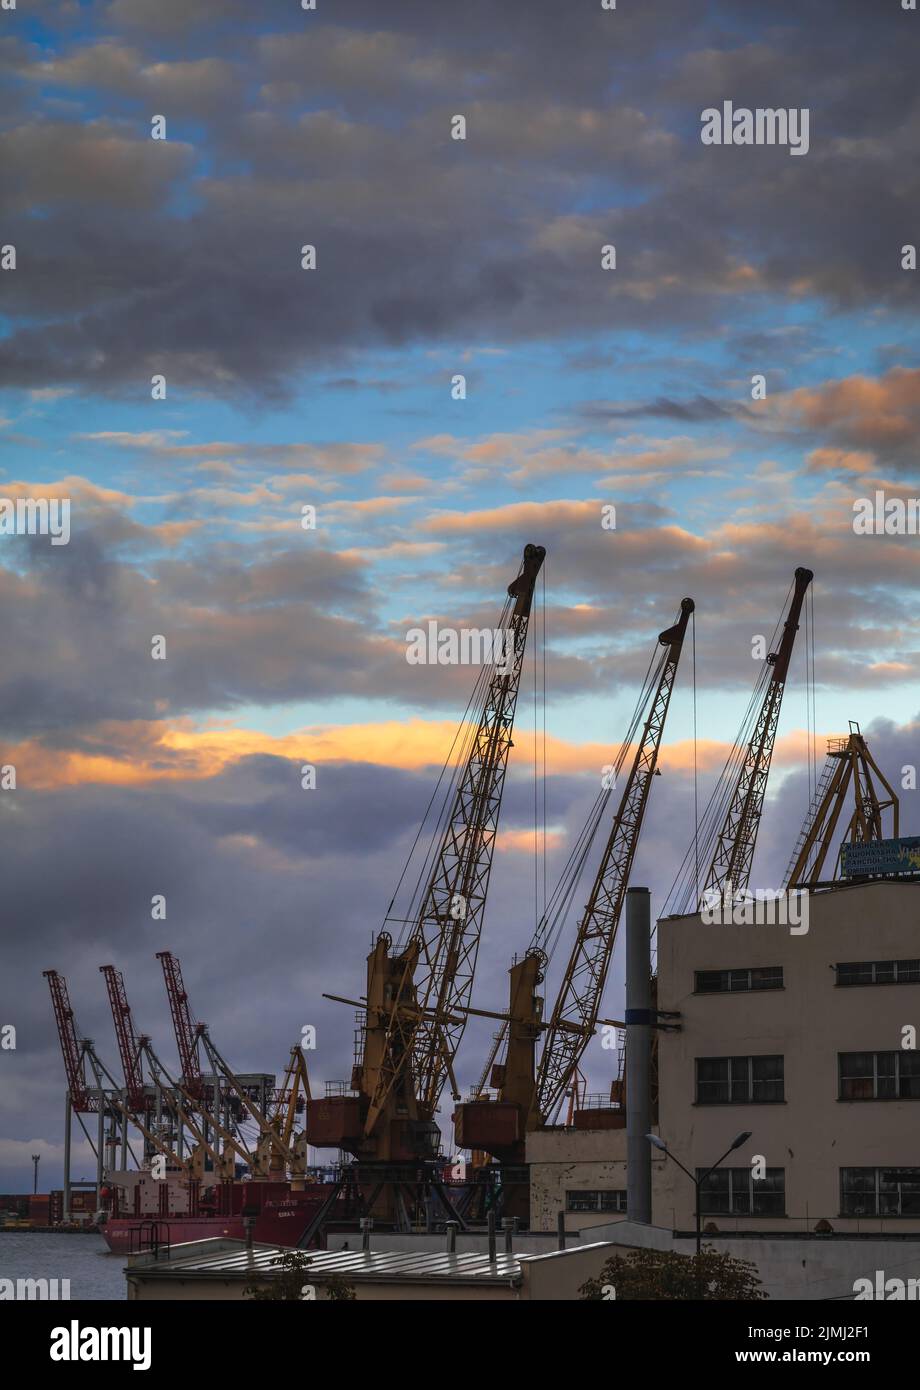 Silhouettes of loading cranes against the backdrop of sunset at the marine port in Odessa. For the first time since the beginning of the Russian war of aggression against Ukraine, a ship carrying grain has left the port of Odessa. This should make millions of tons of grain available again for the world market. Before the Russian war of aggression, Ukraine was one of the world's most important grain exporters. For them, billions in revenue from the sale of wheat and corn, among other commodities, is at stake. Stock Photo